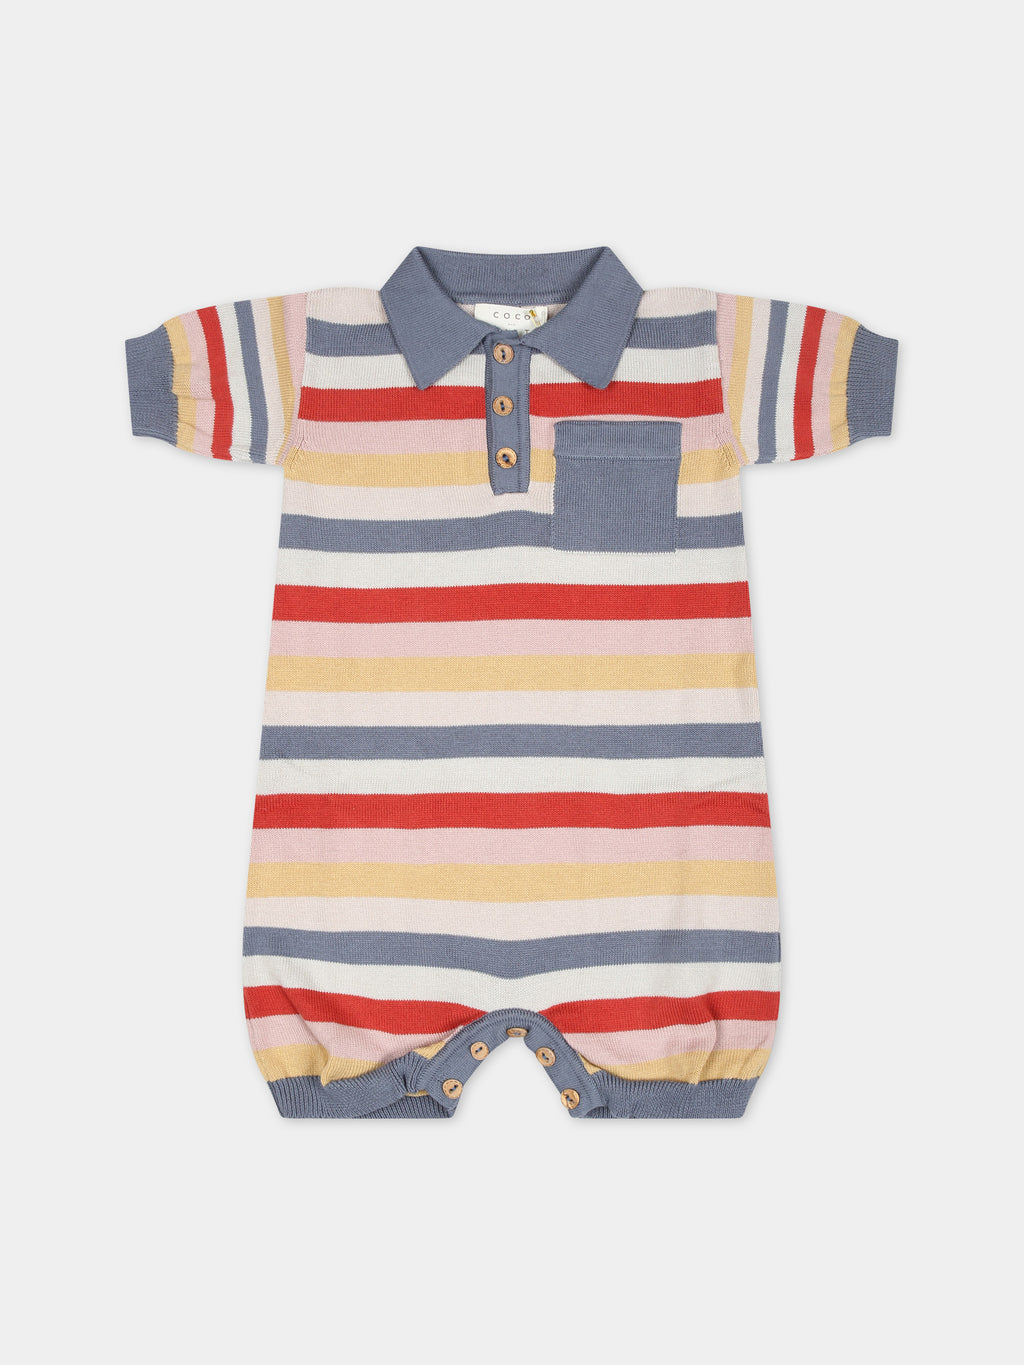 Multicolor romper for baby boy with striped pattern